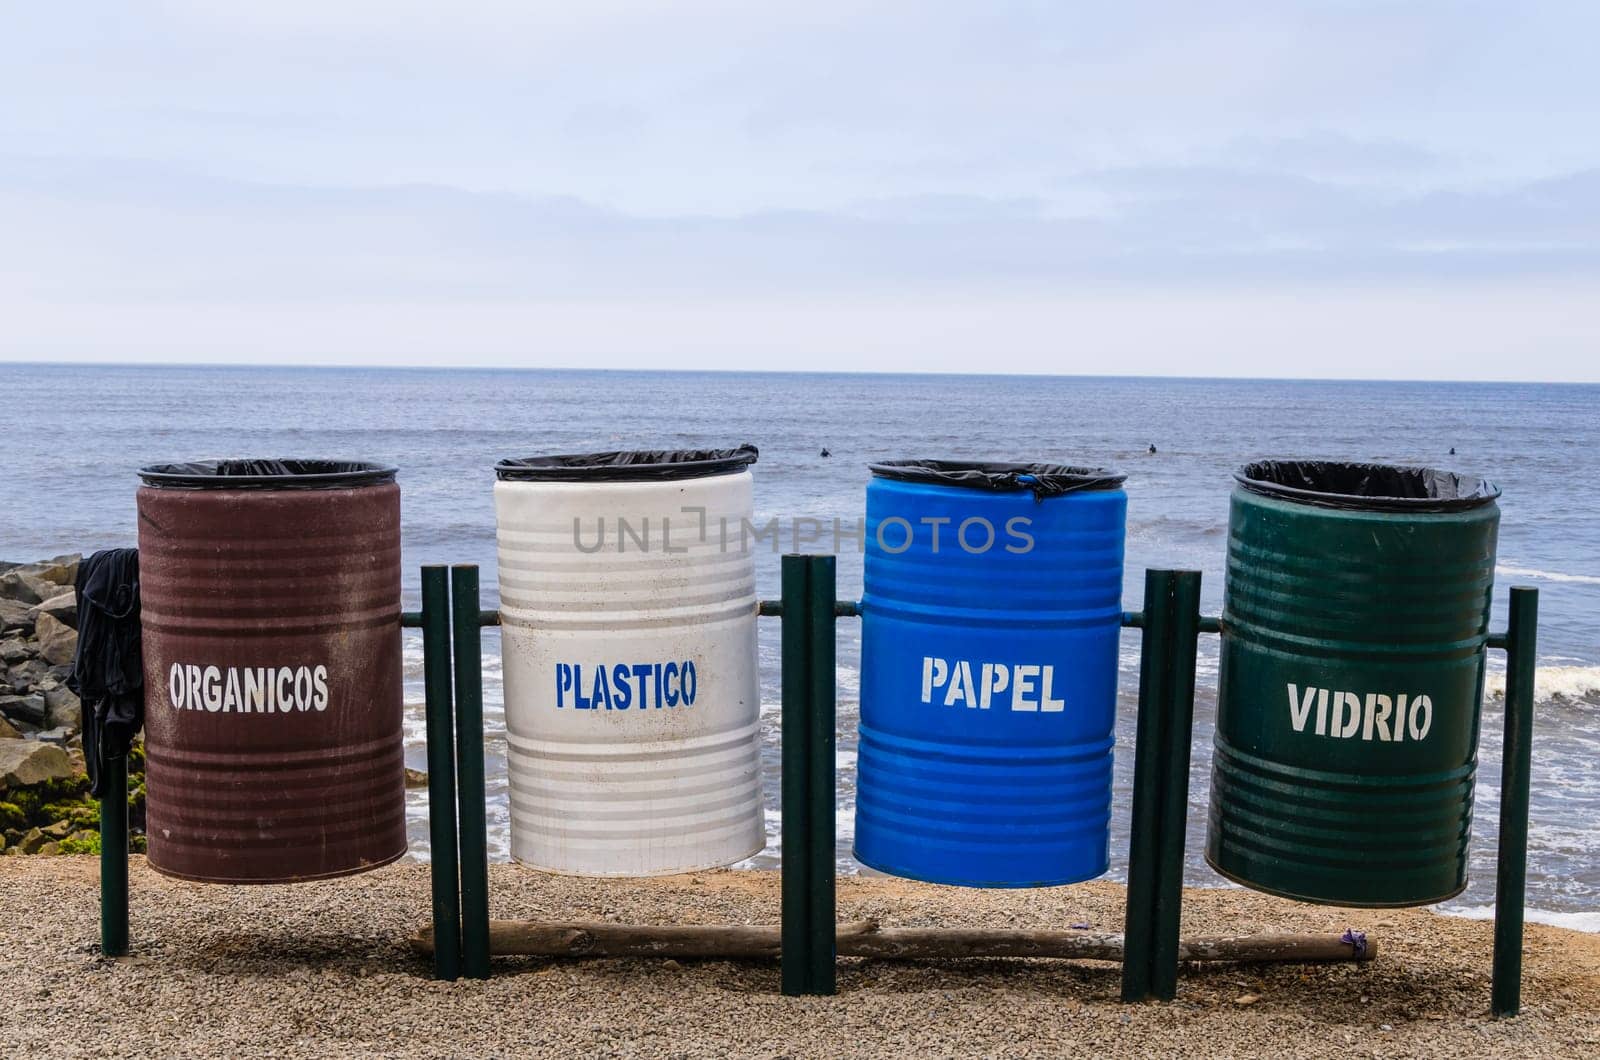 Colorful recycling bins for collecting recycled materials on the beaches of the Lima coast in Peru. by Peruphotoart